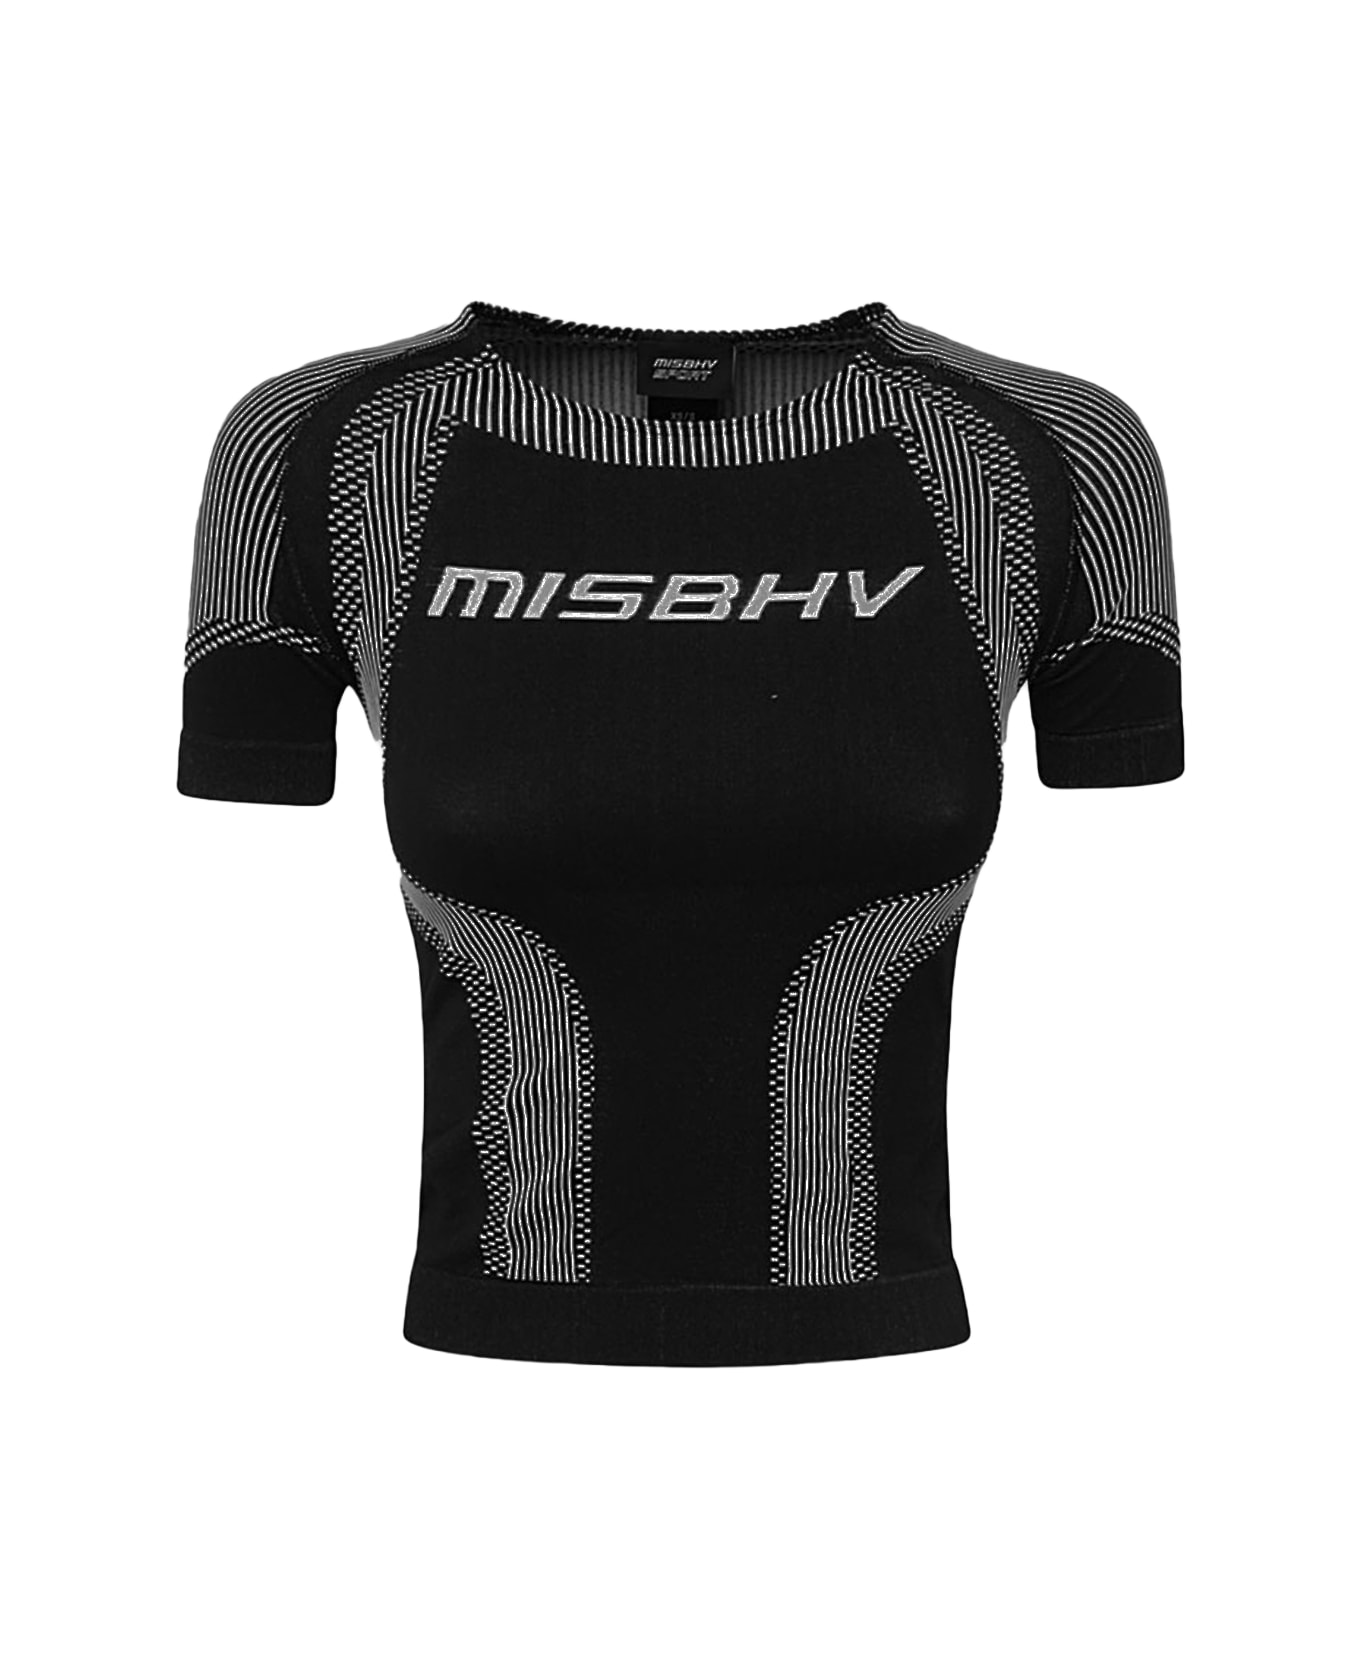 MISBHV Black And White Sport T-shirt - MUTED BLACK